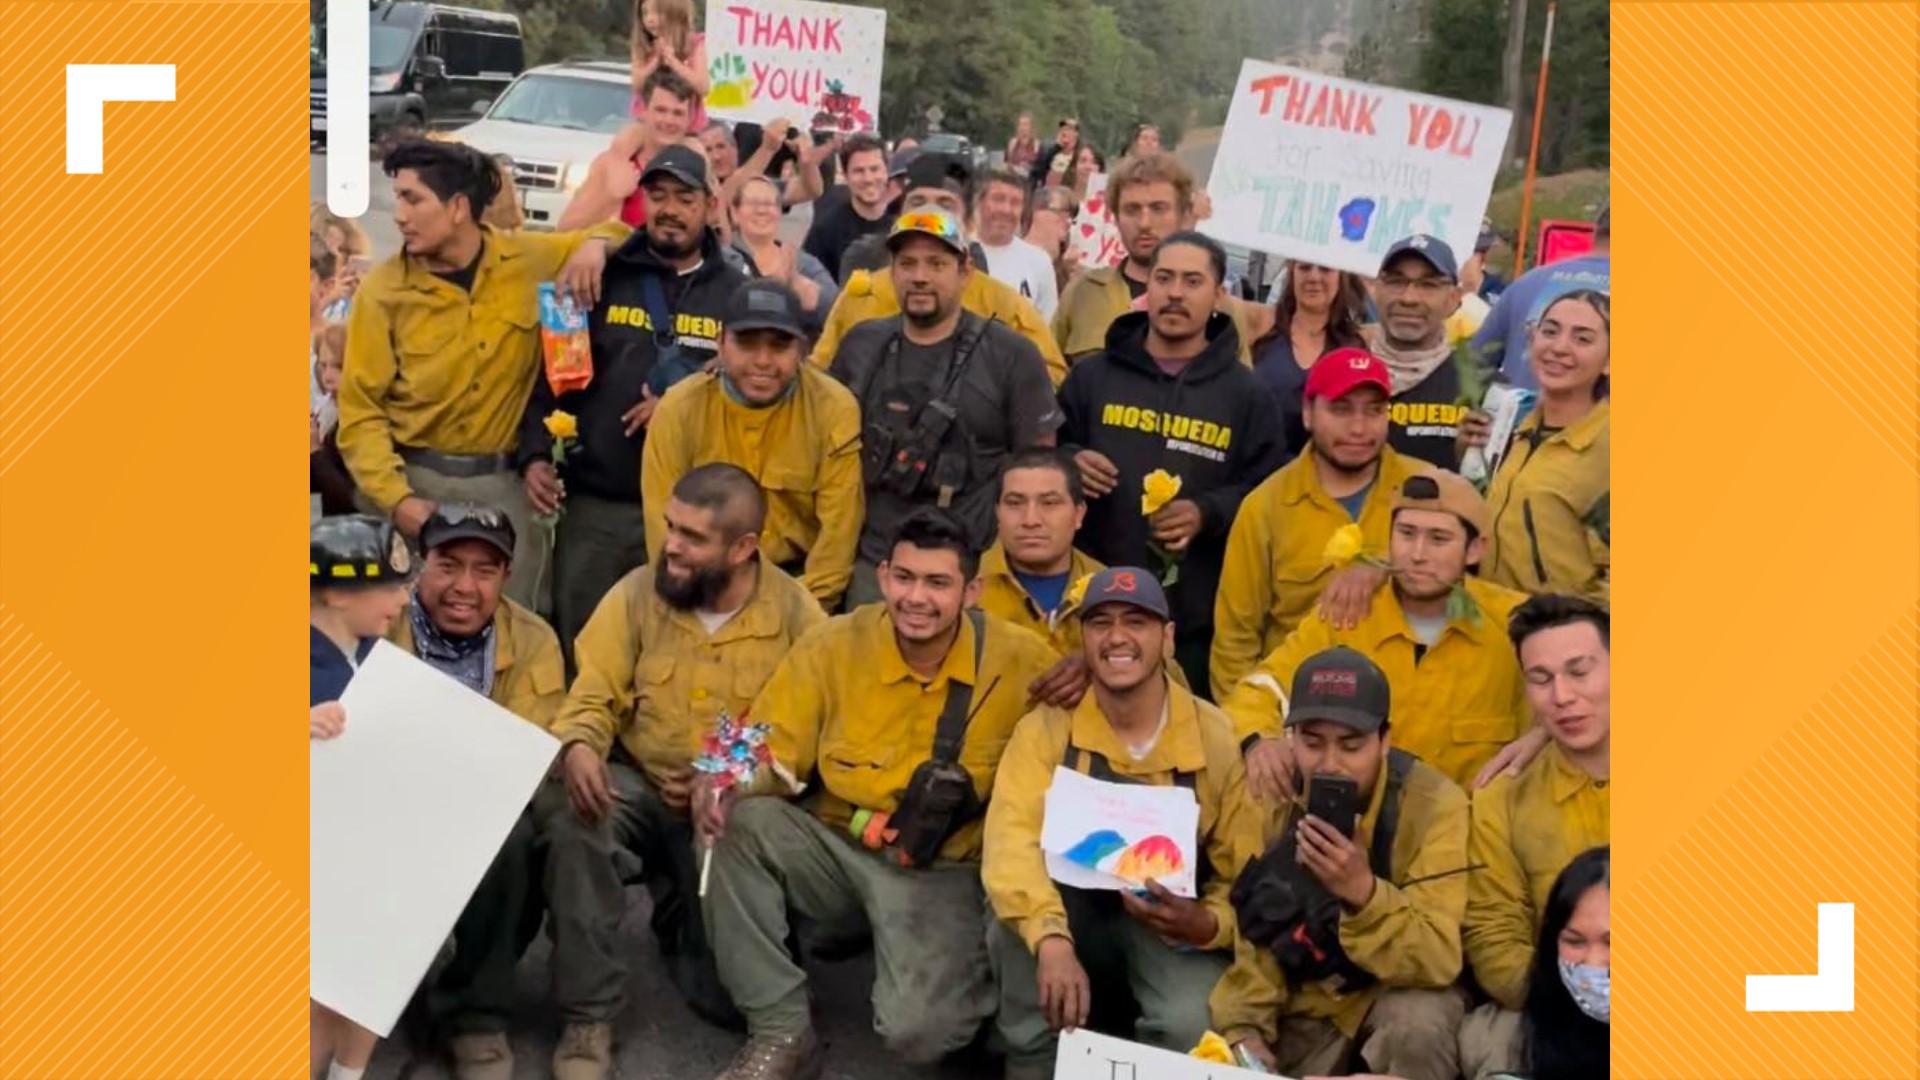 Nothing was stopping hundreds of people from telling their heroes thank you after saving their city, homes and businesses from the Caldor Fire.